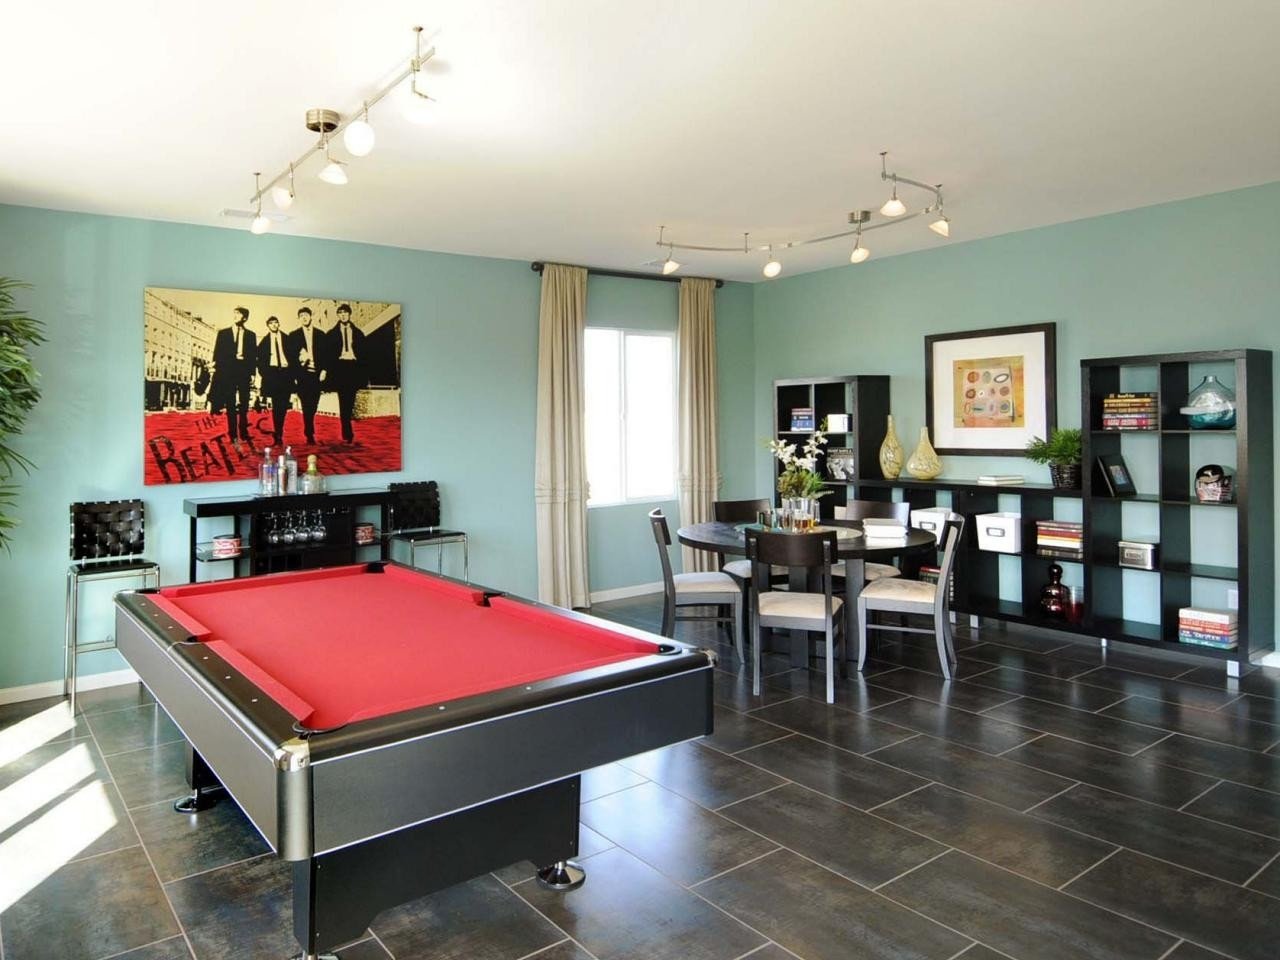 10 Gorgeous Game Room Ideas For Kids kids game room ideas rooms for and family hgtv best 2022